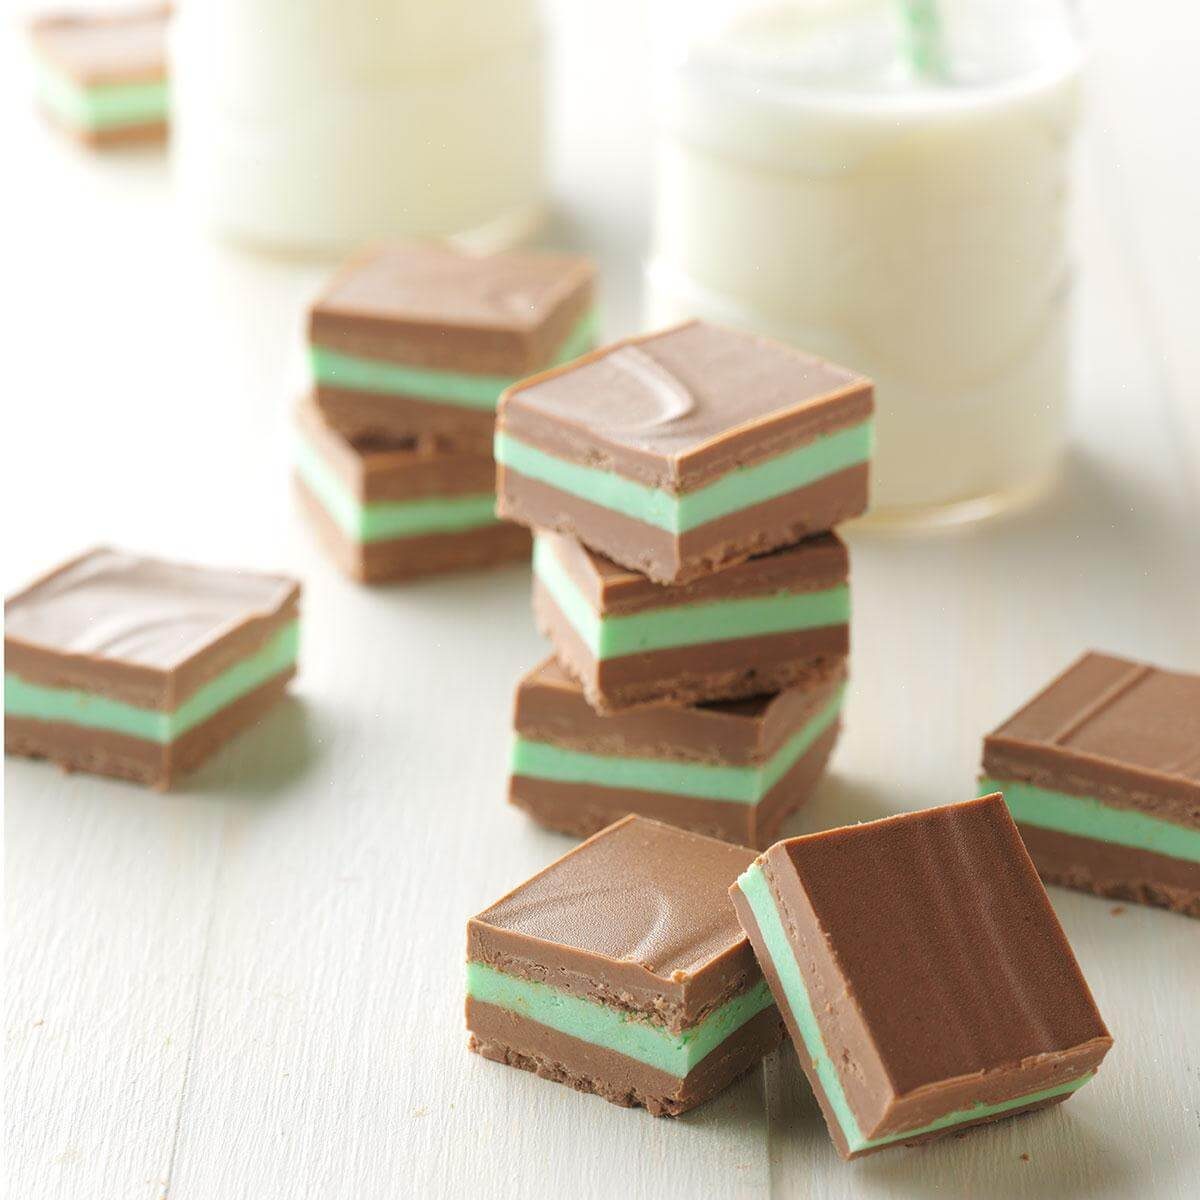 Layered Mint Candies Recipe | Taste of Home